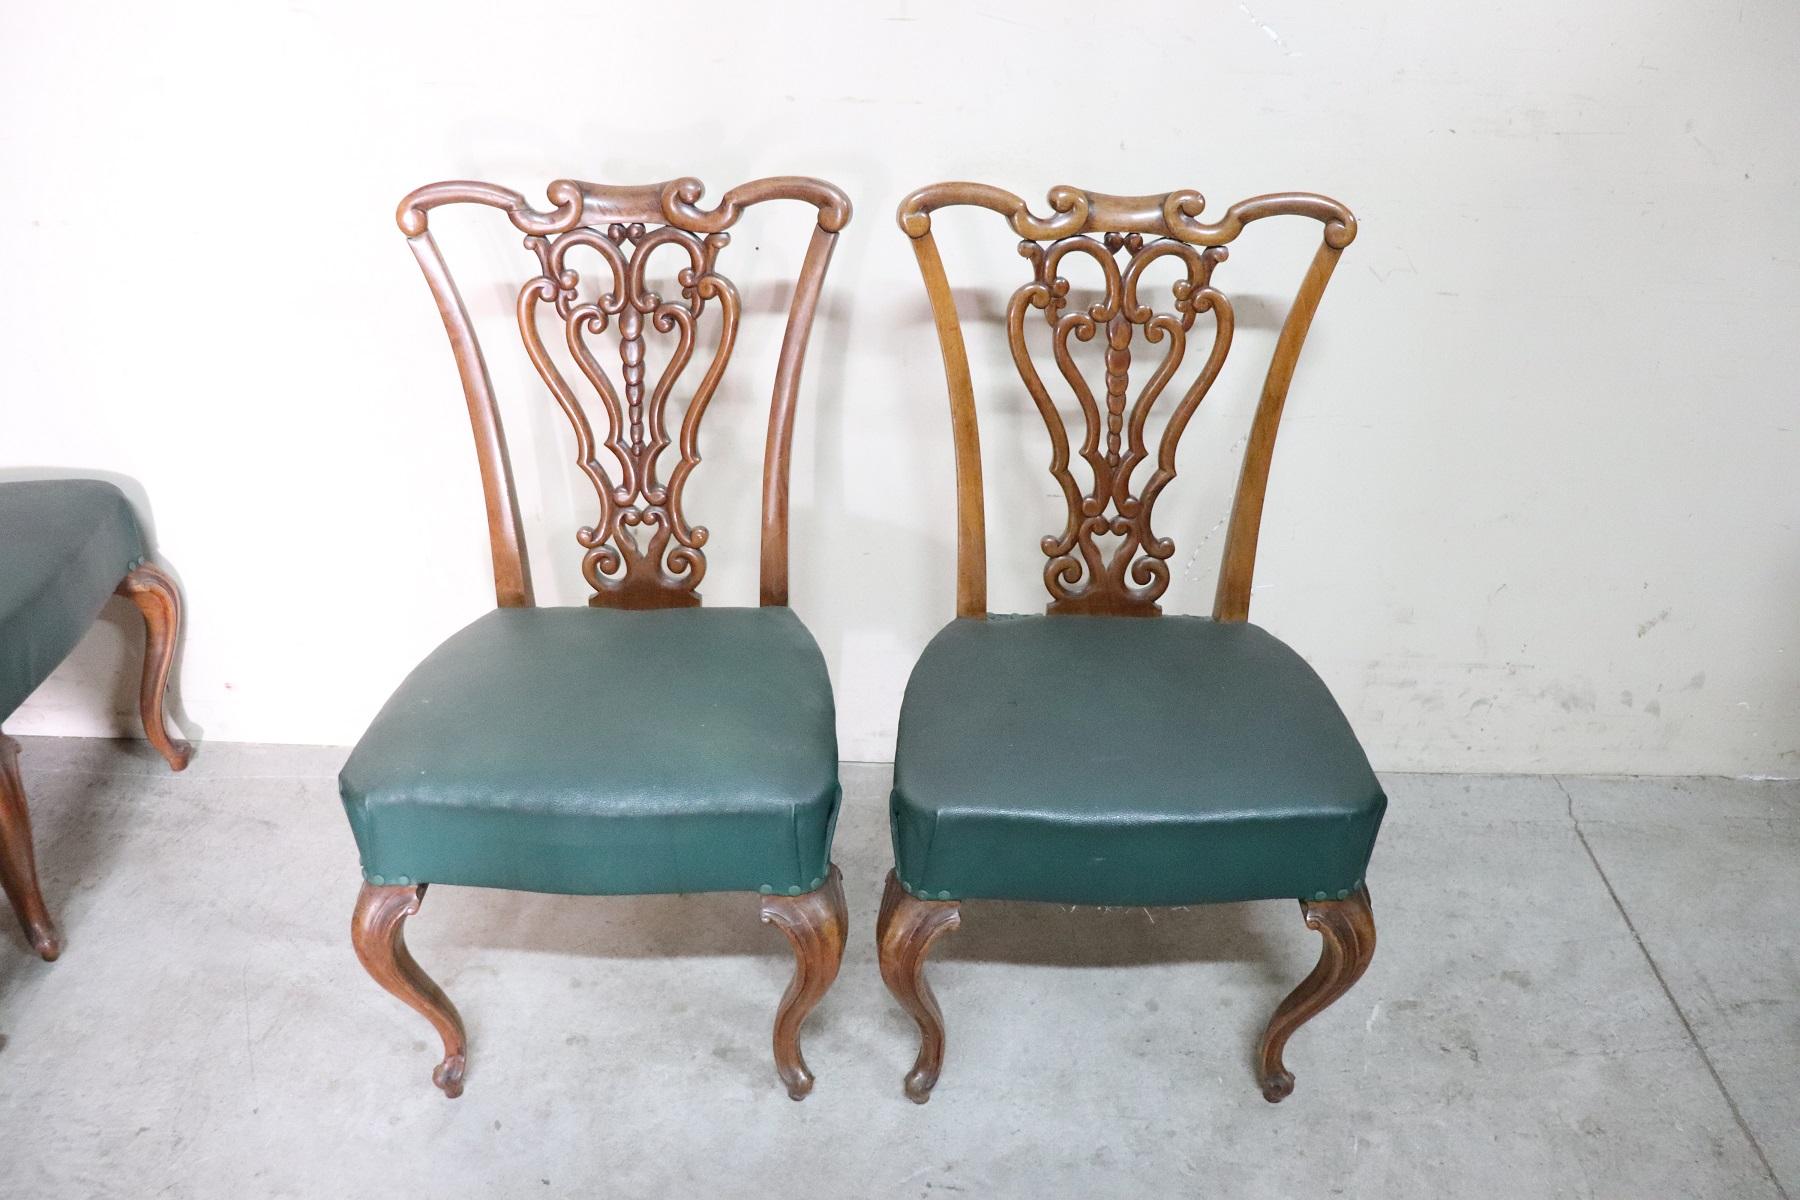 Series of eight refined 19th century authentic Italian Art Nouveau walnut wood chairs in the style of Alberto Issel. Refined and rare decoration the back is hand carved with a curls and swirls moved. The legs are very elegant moved. The seat is wide